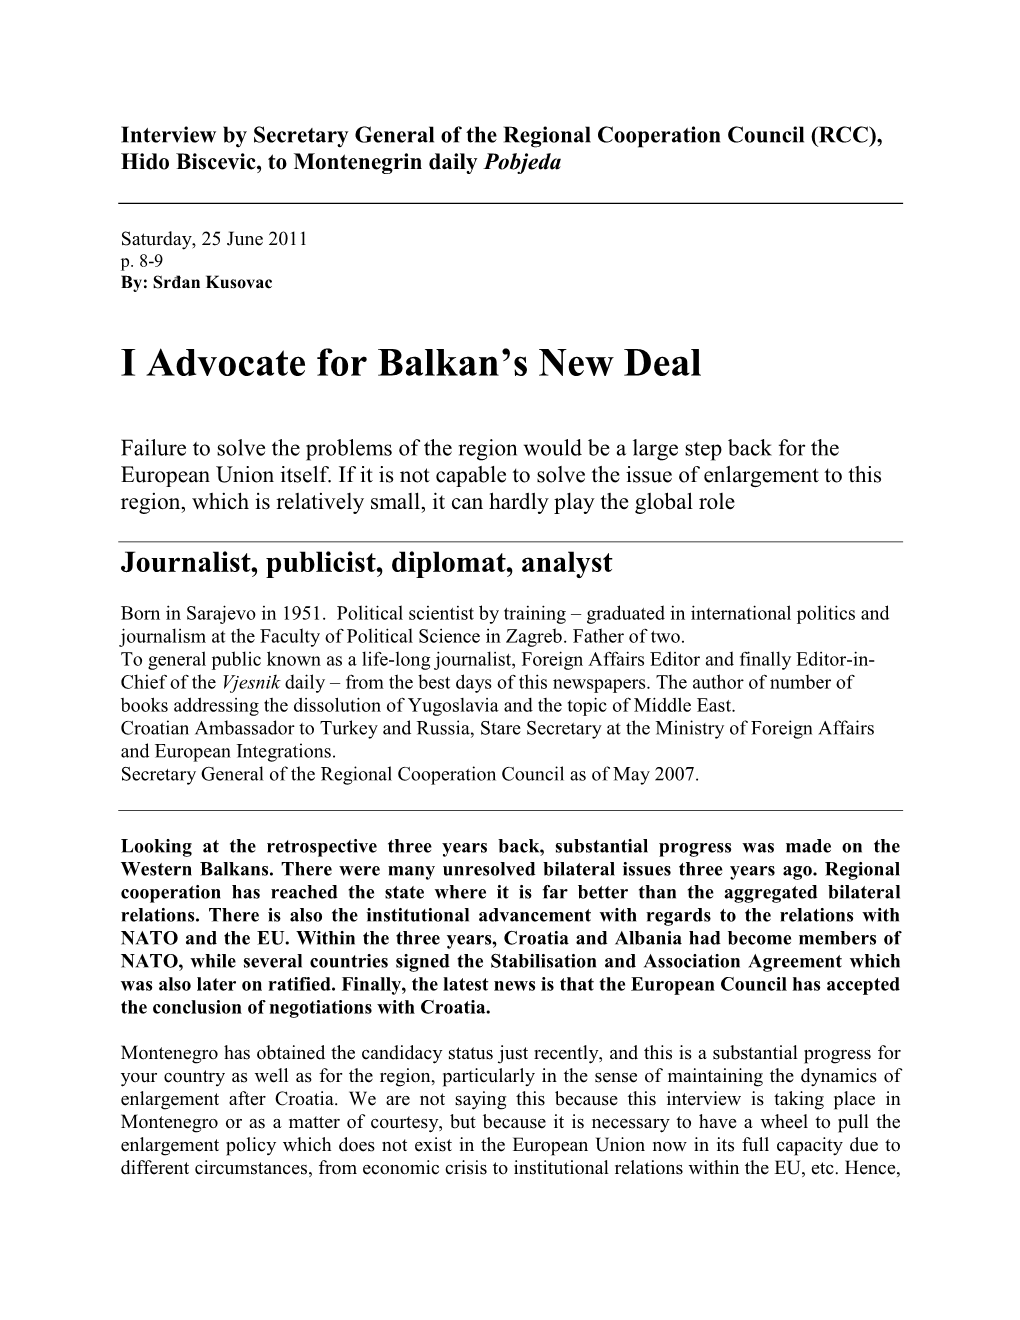 I Advocate for Balkan's New Deal